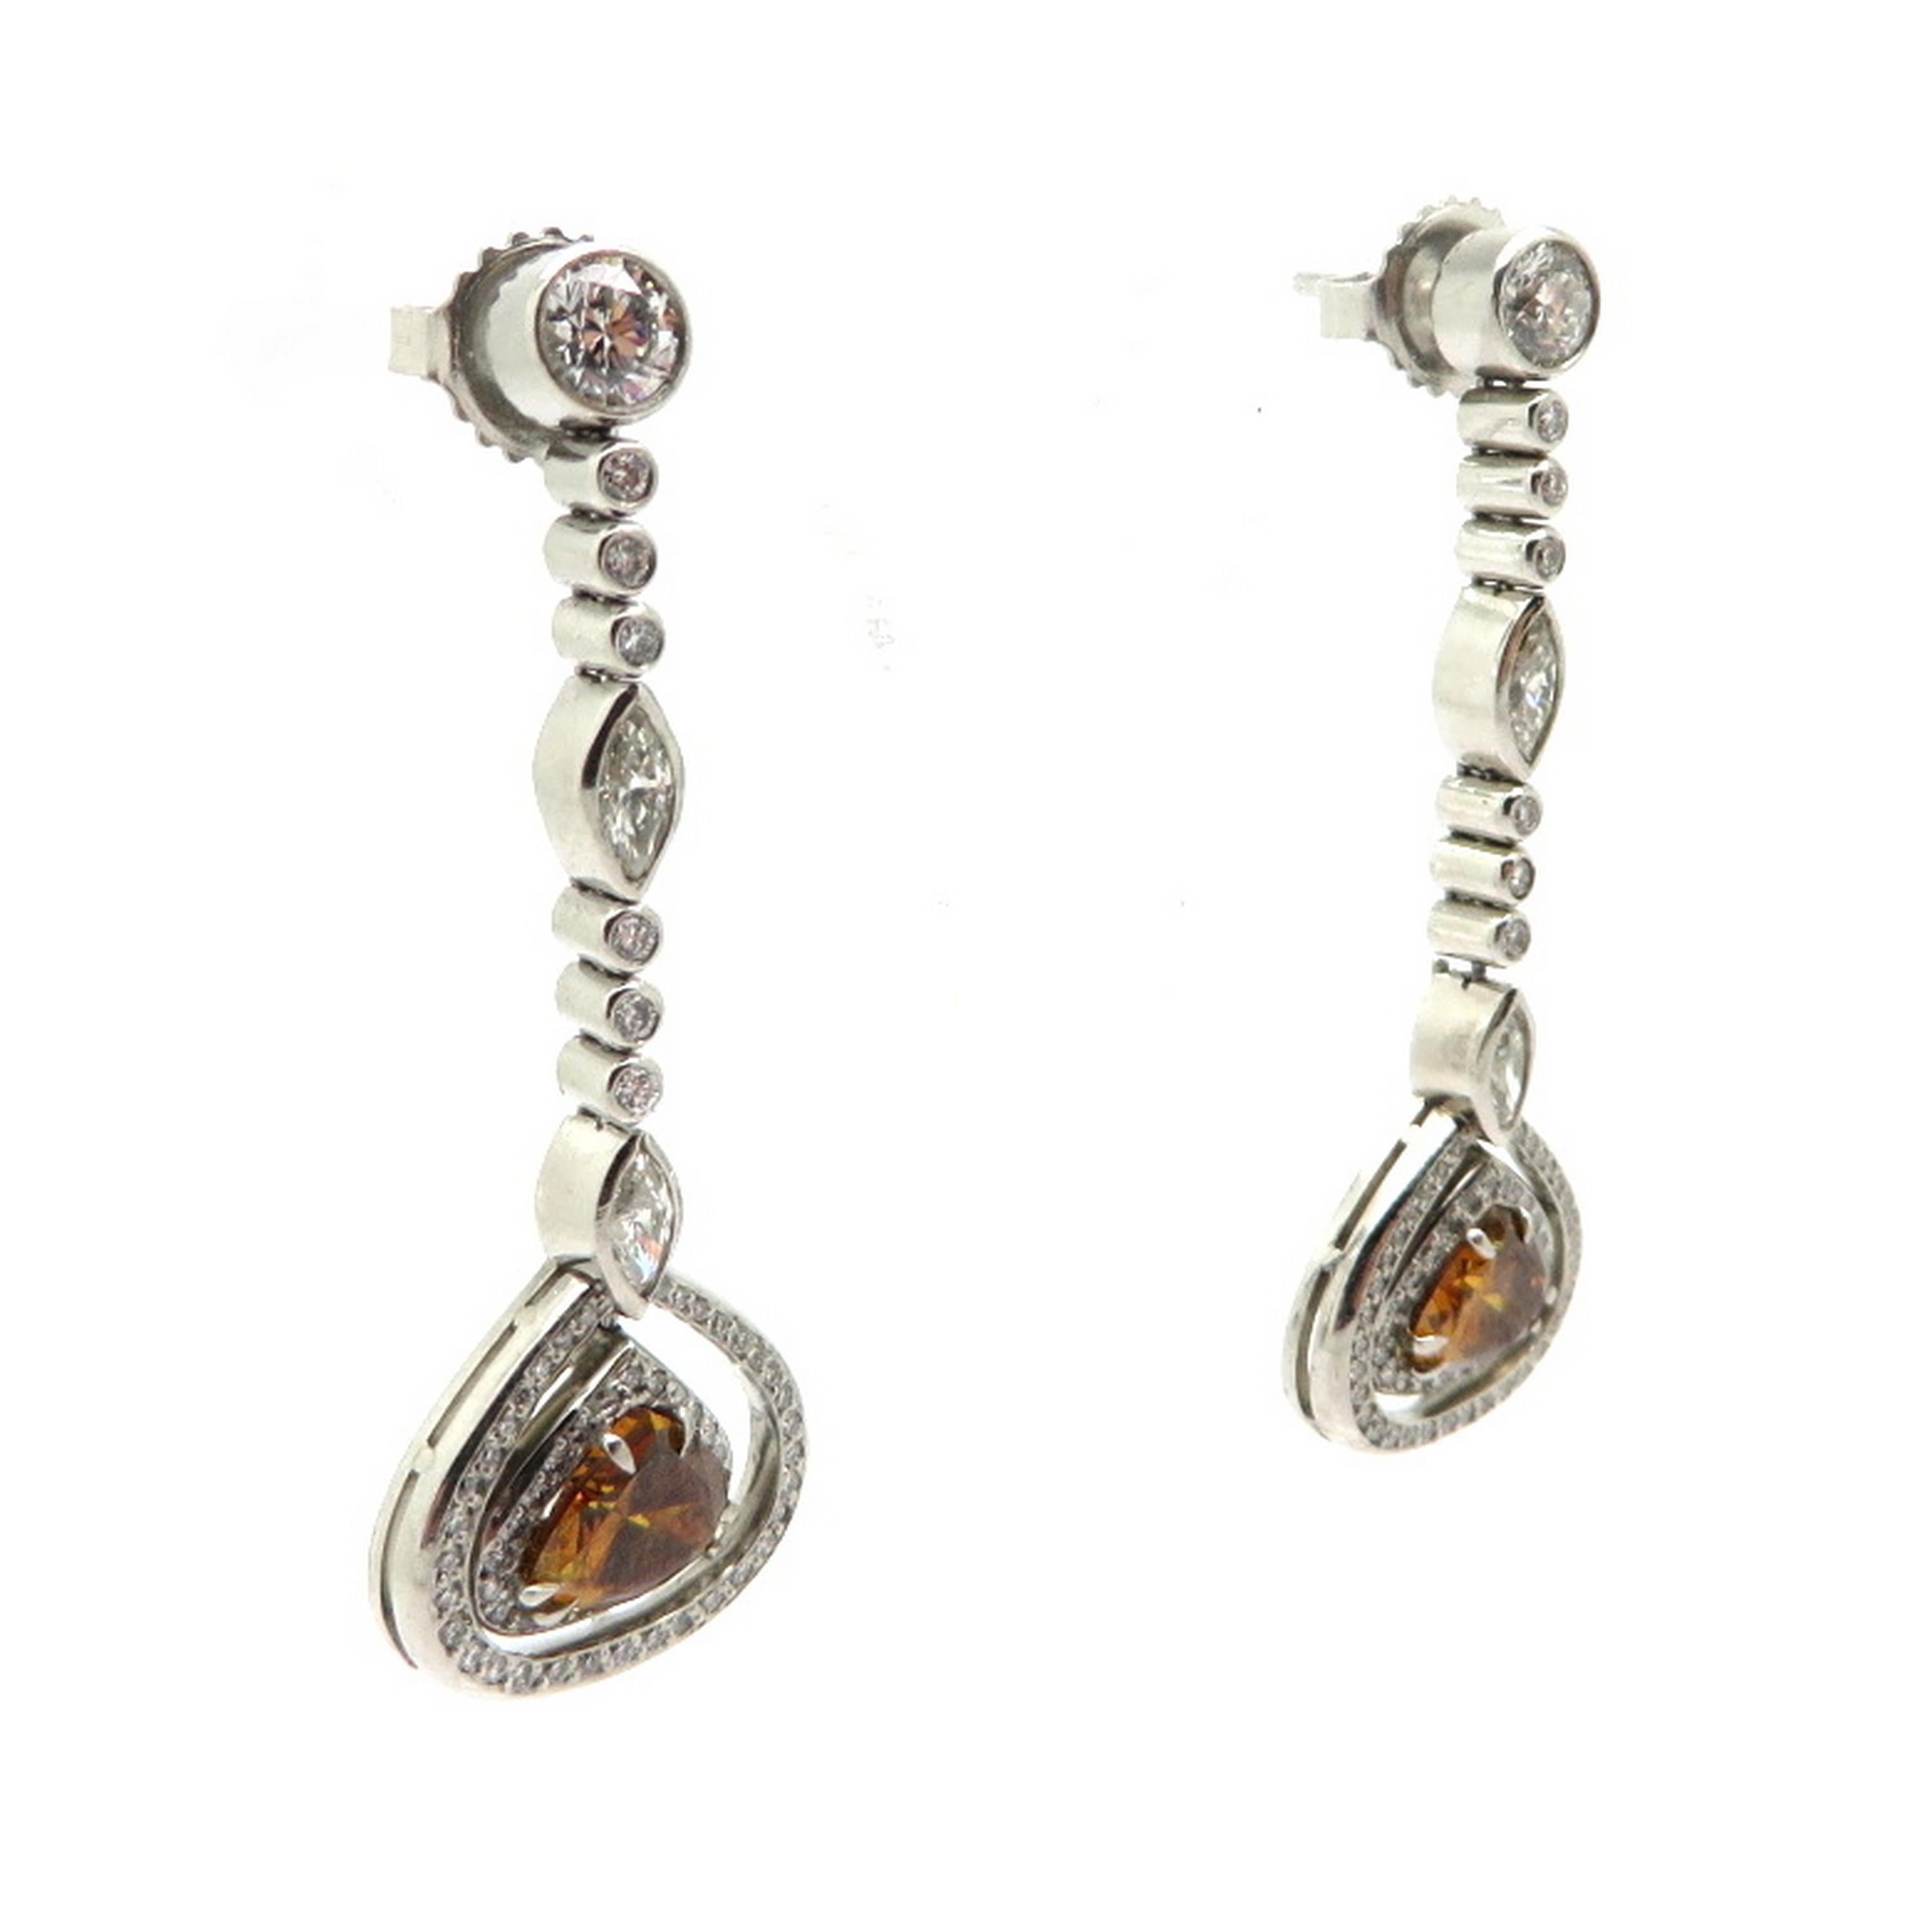 GIA certified platinum and 18K yellow gold brown and white diamond dangle earrings. Showcasing two pear shape fancy brown/ orange diamonds weighing 1.92 carats, set in 18K Yellow  Gold. GIA certificate # 11567294595. Featuring four bezel set